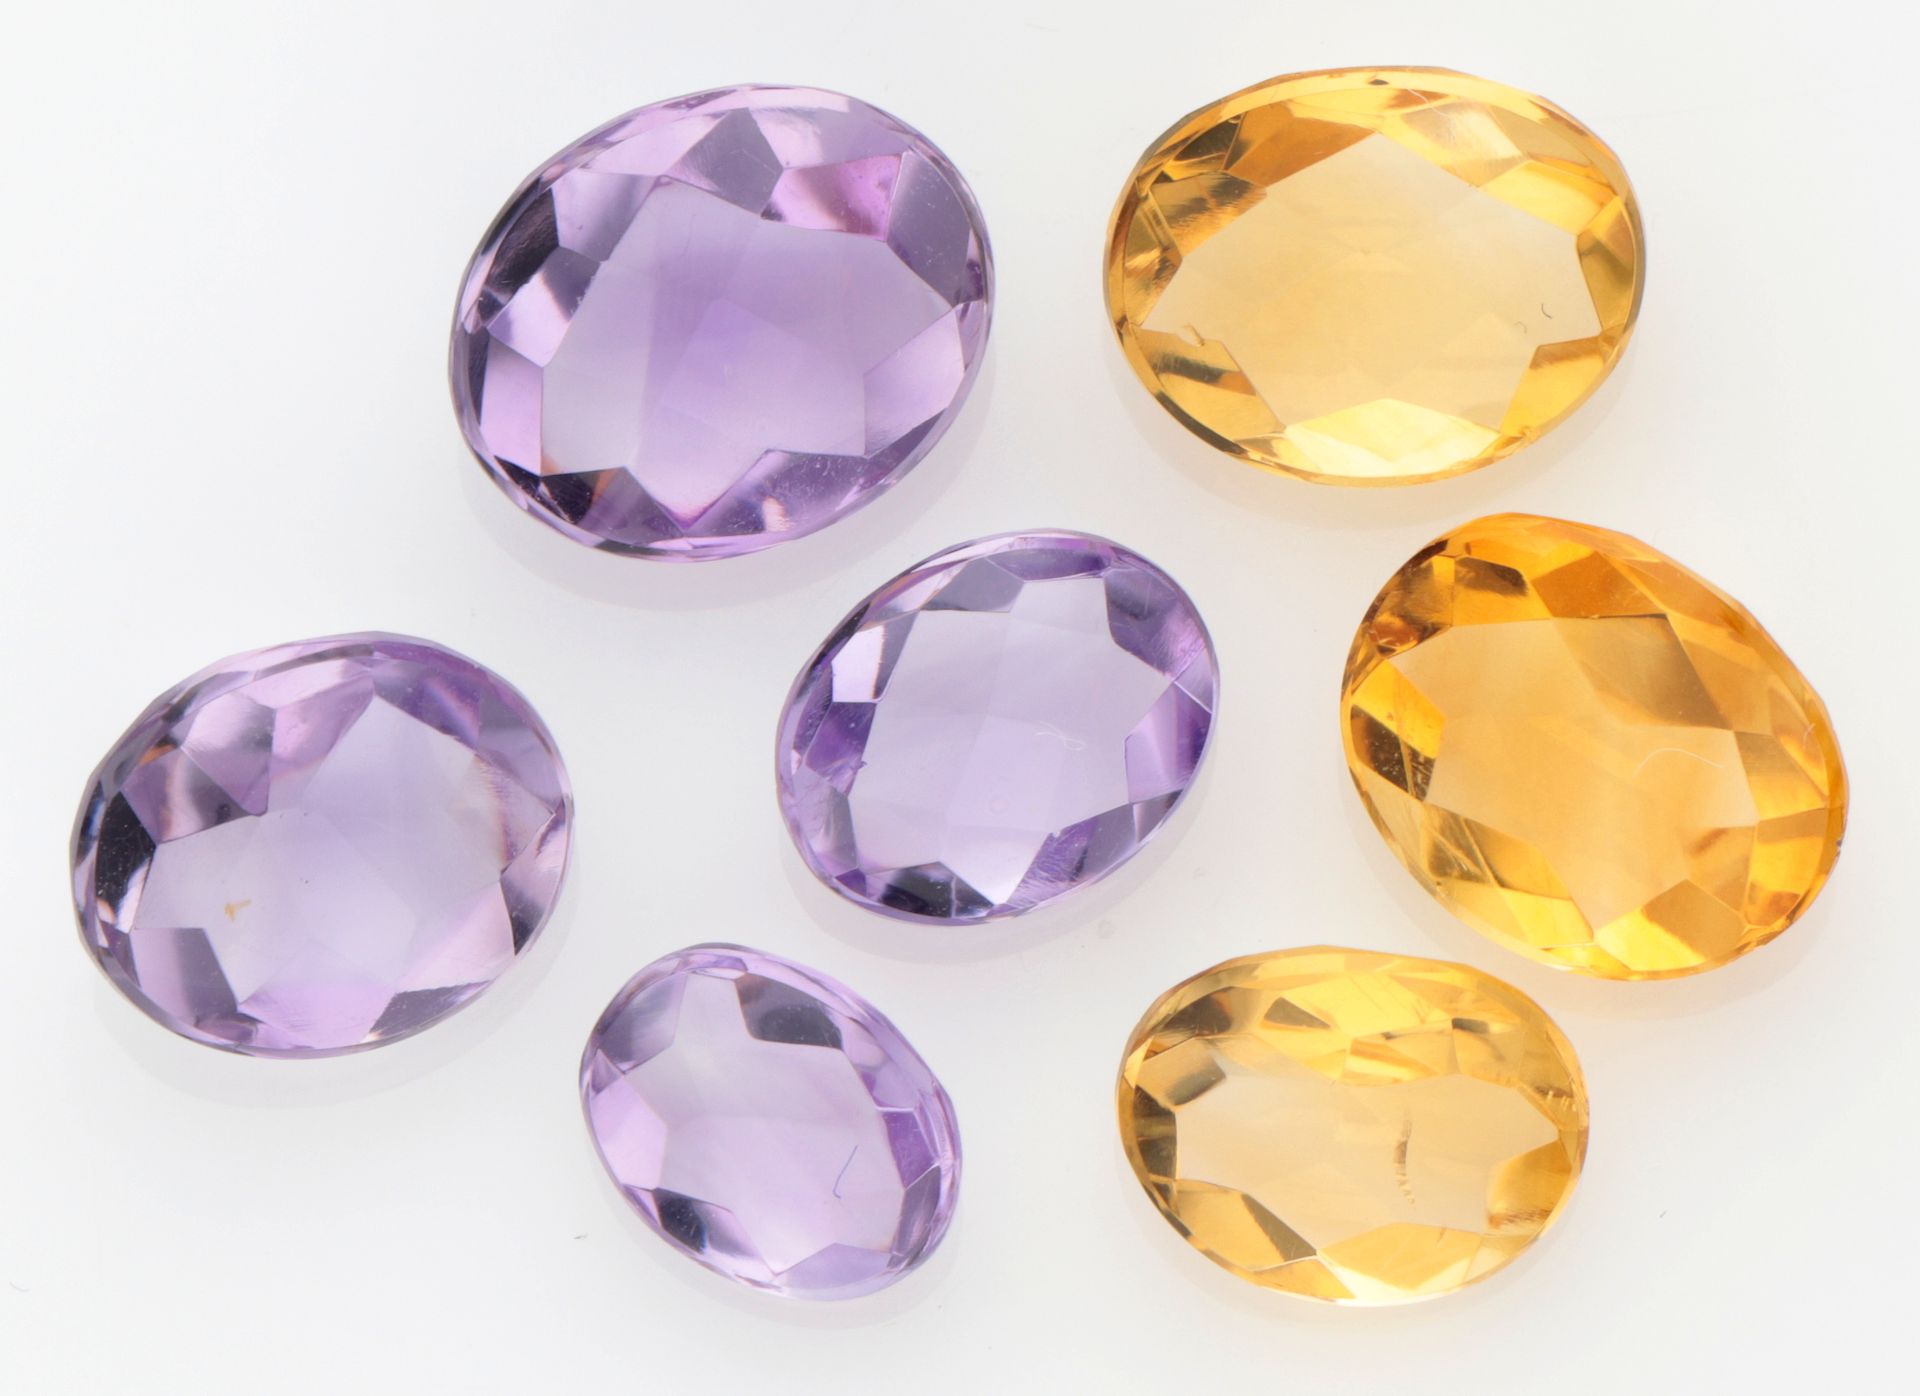 Lot of 7 mixed cut natural amethysts and citrines. Varie dimensioni.